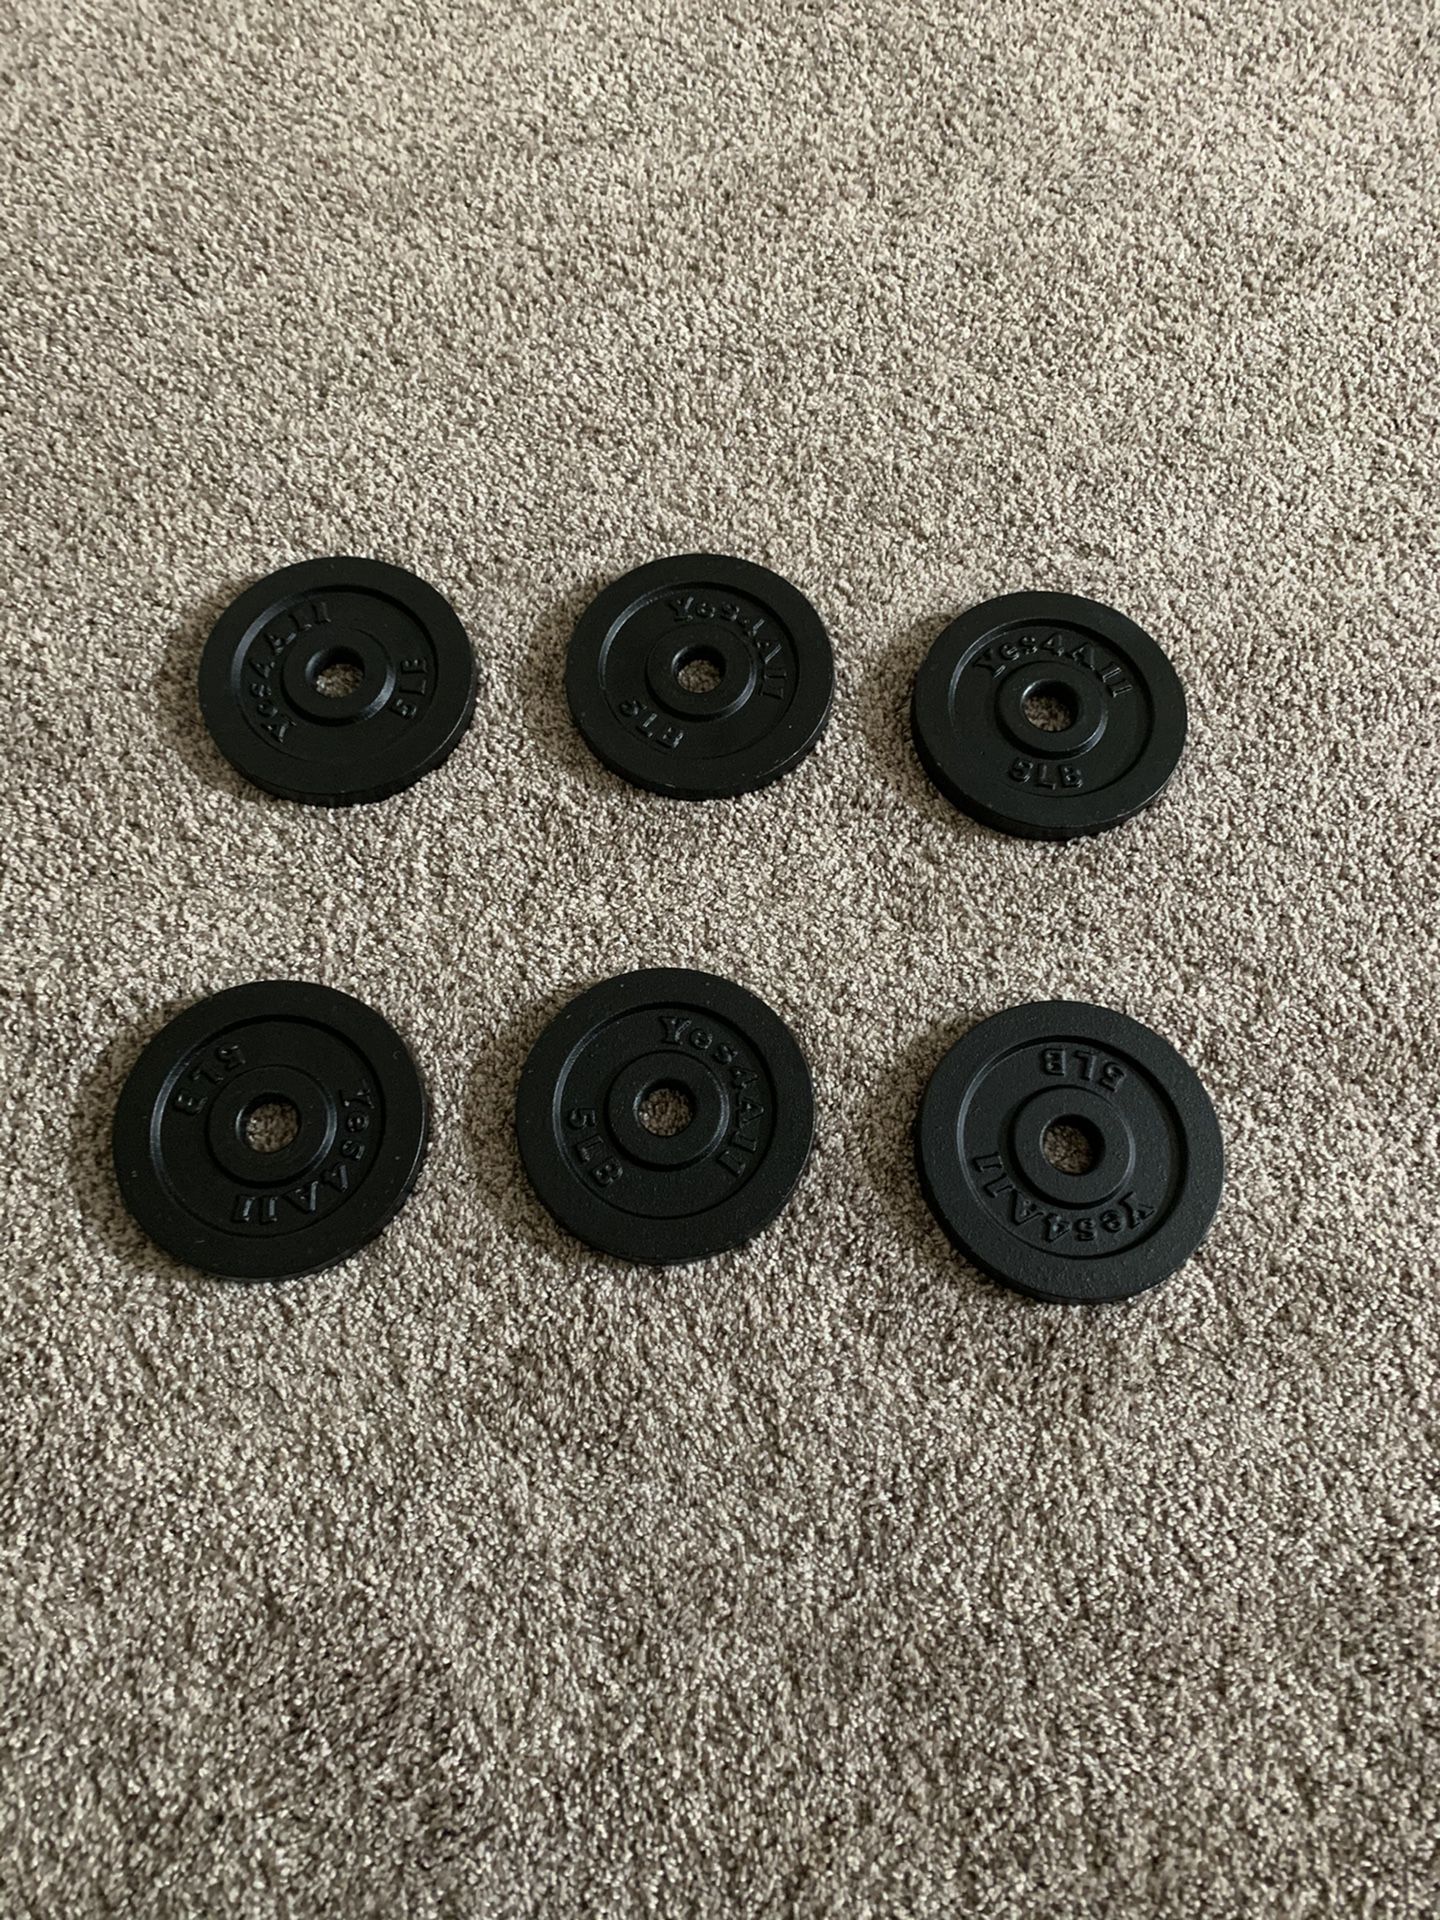 Five lb weight plates